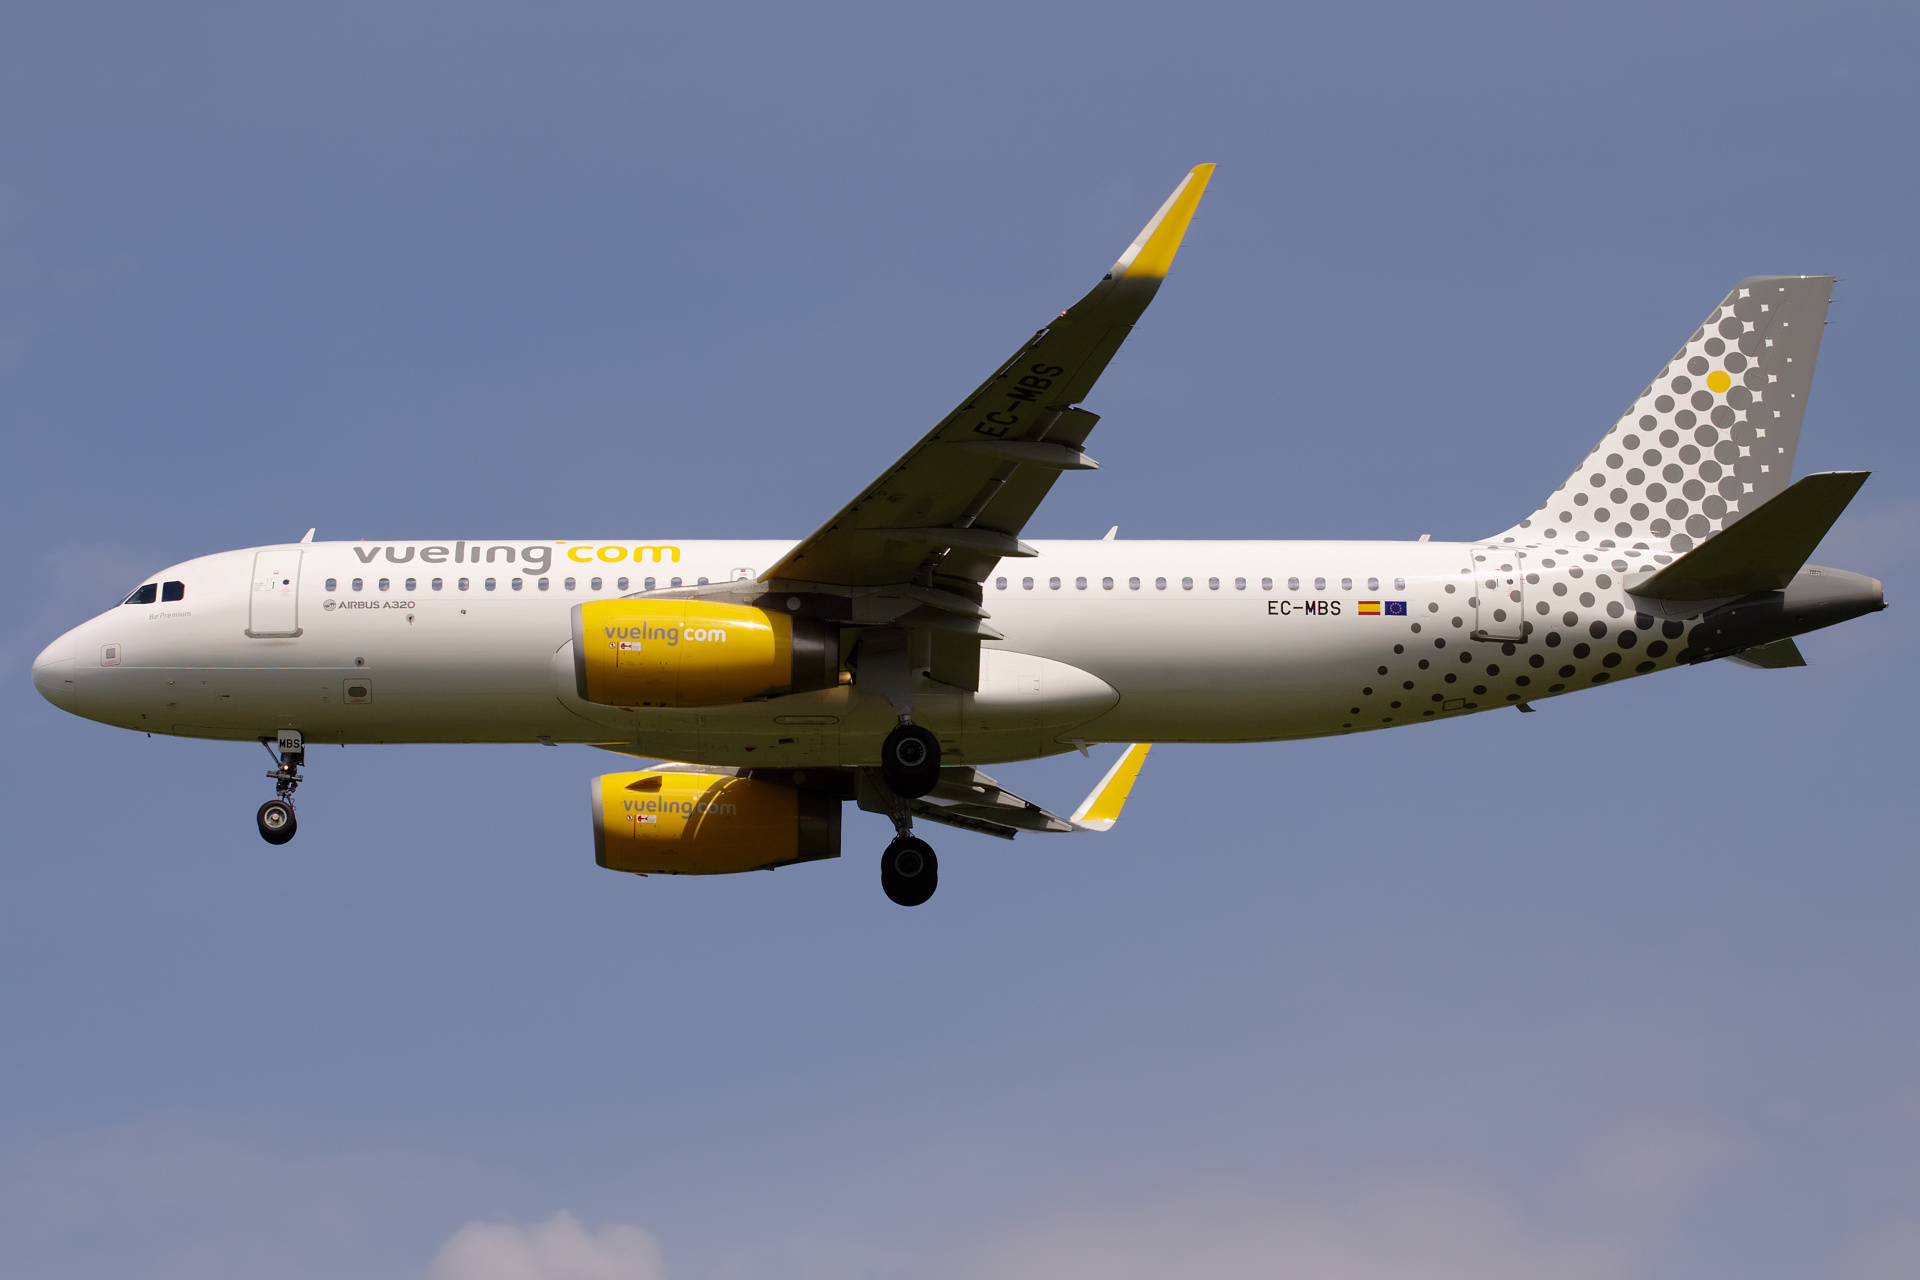 EC-MBS (Aircraft » EPWA Spotting » Airbus A320-200 » Vueling Airlines)